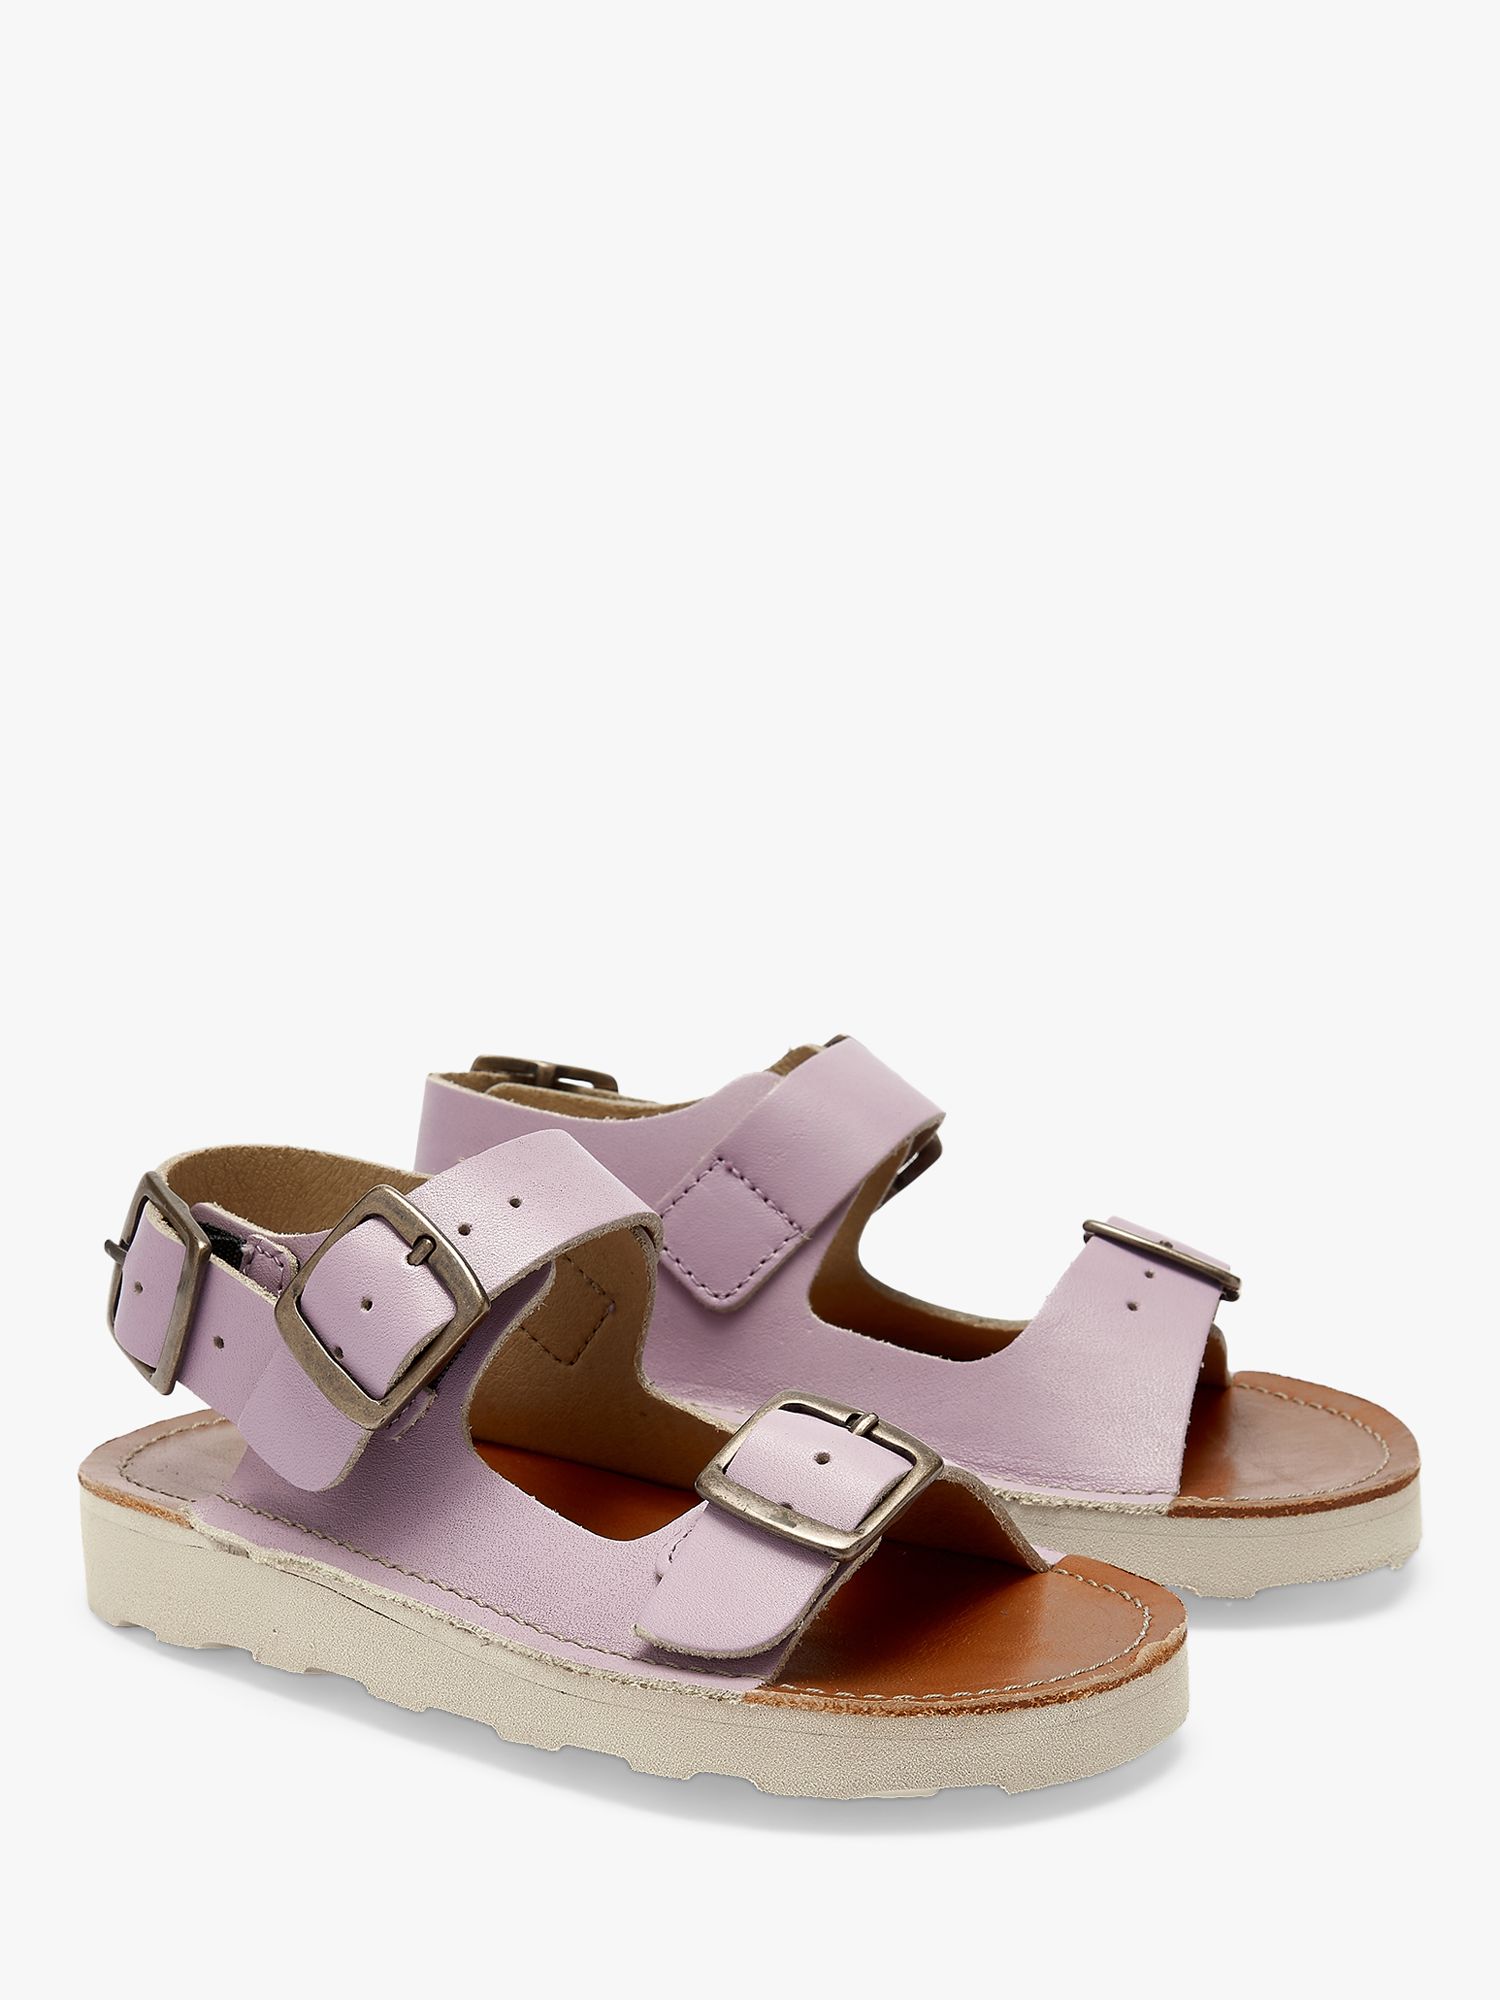 Young Soles Kids' Spike Leather Sandals, Lilac, 7 Jnr